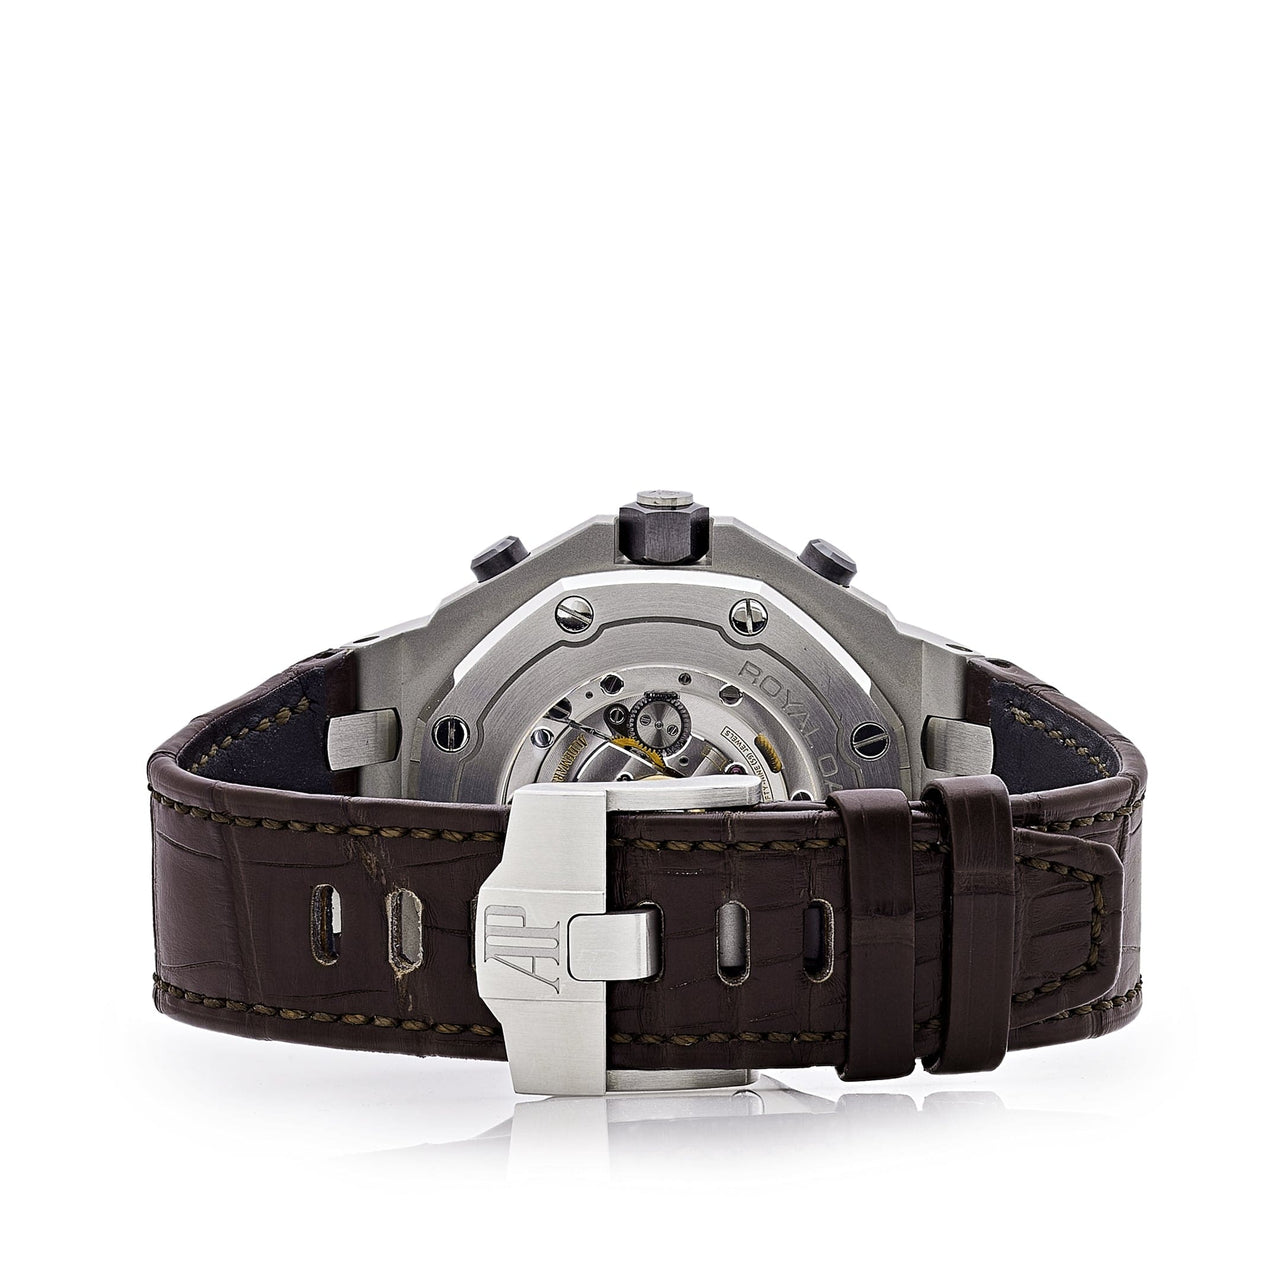 Audemars Piguet Royal Oak Offshore Chronograph 26470ST.OO.A820CR.01 Stainless Steel Brown Dial